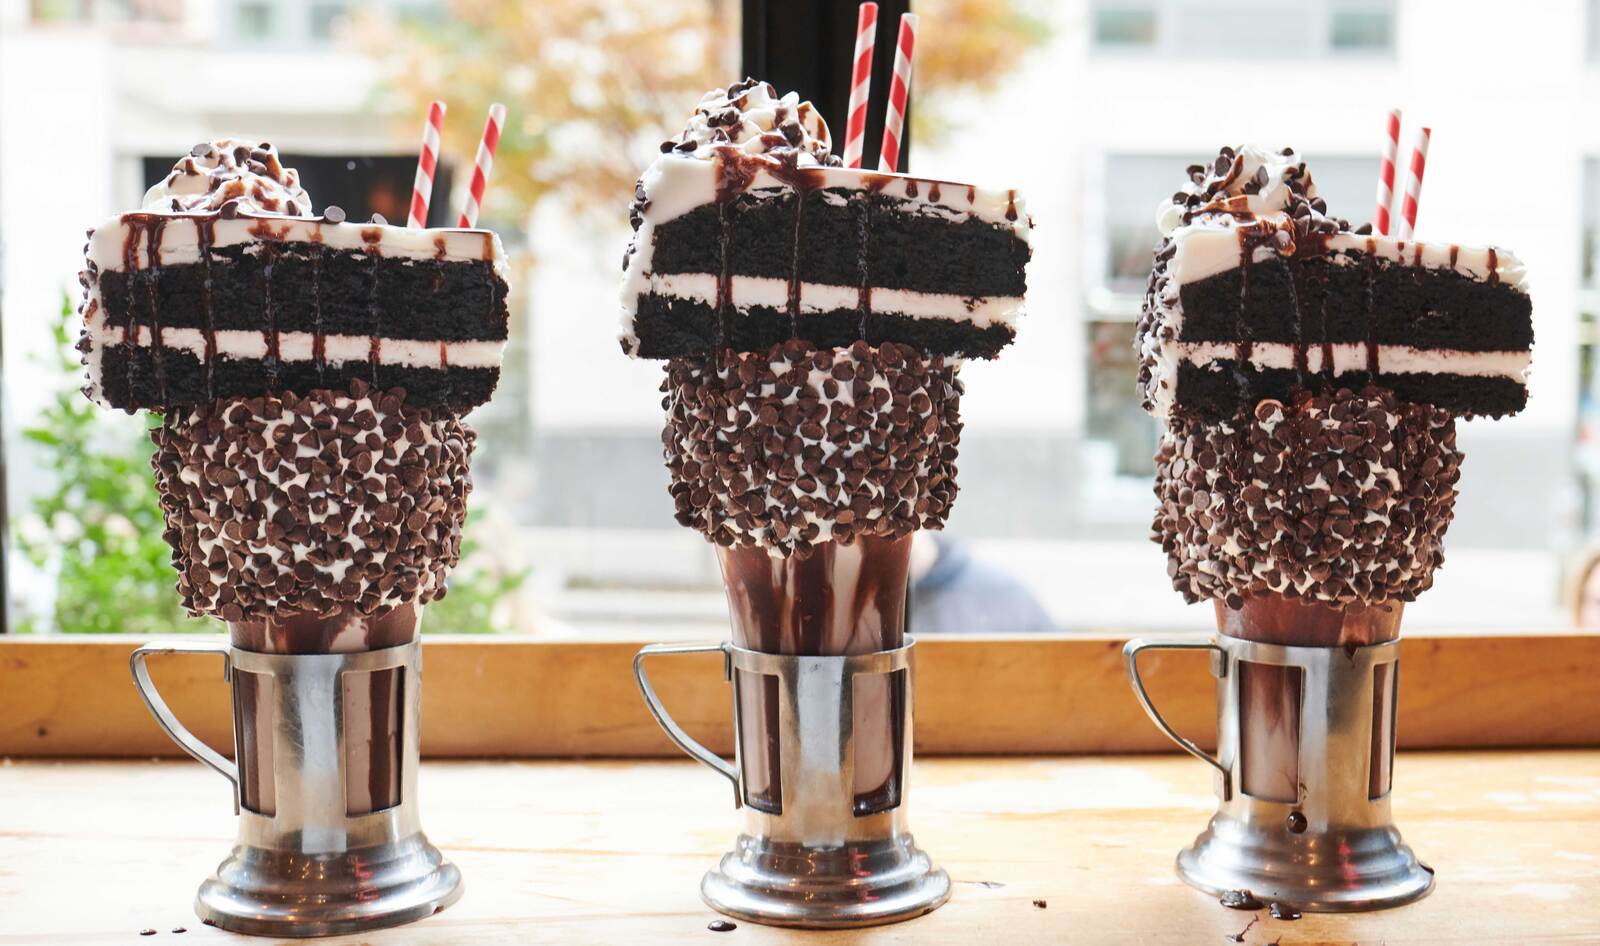 Craft Burger Chain Black Tap Launches Its First Over-the-Top Vegan CakeShake